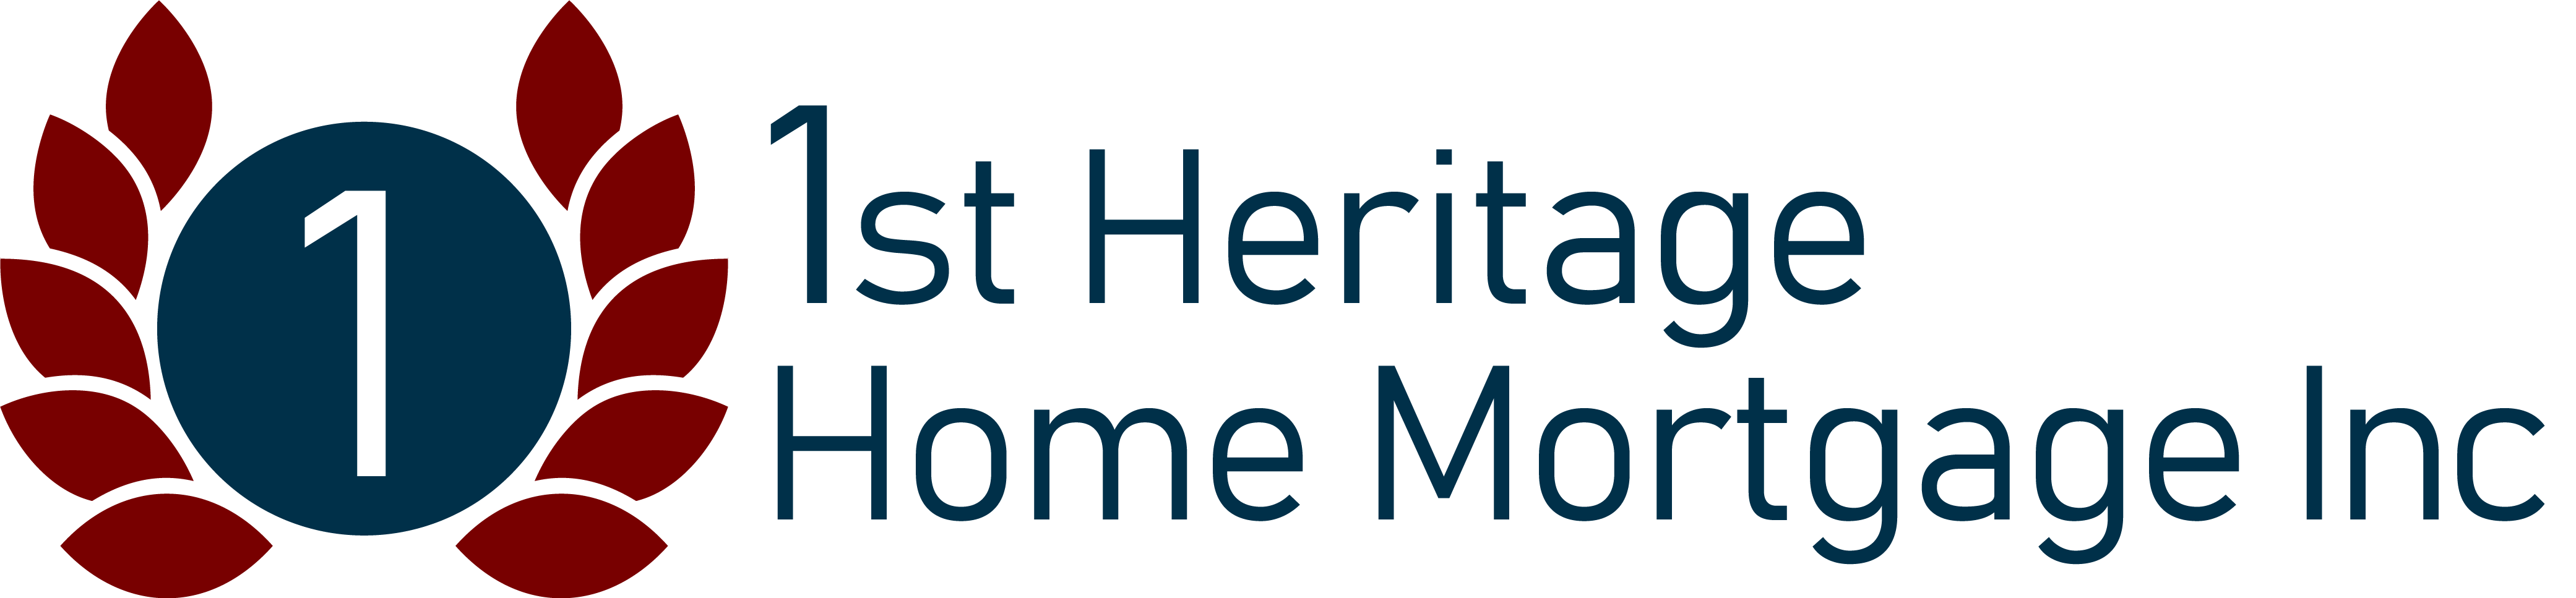 1st Heritage Home Mortgage Inc